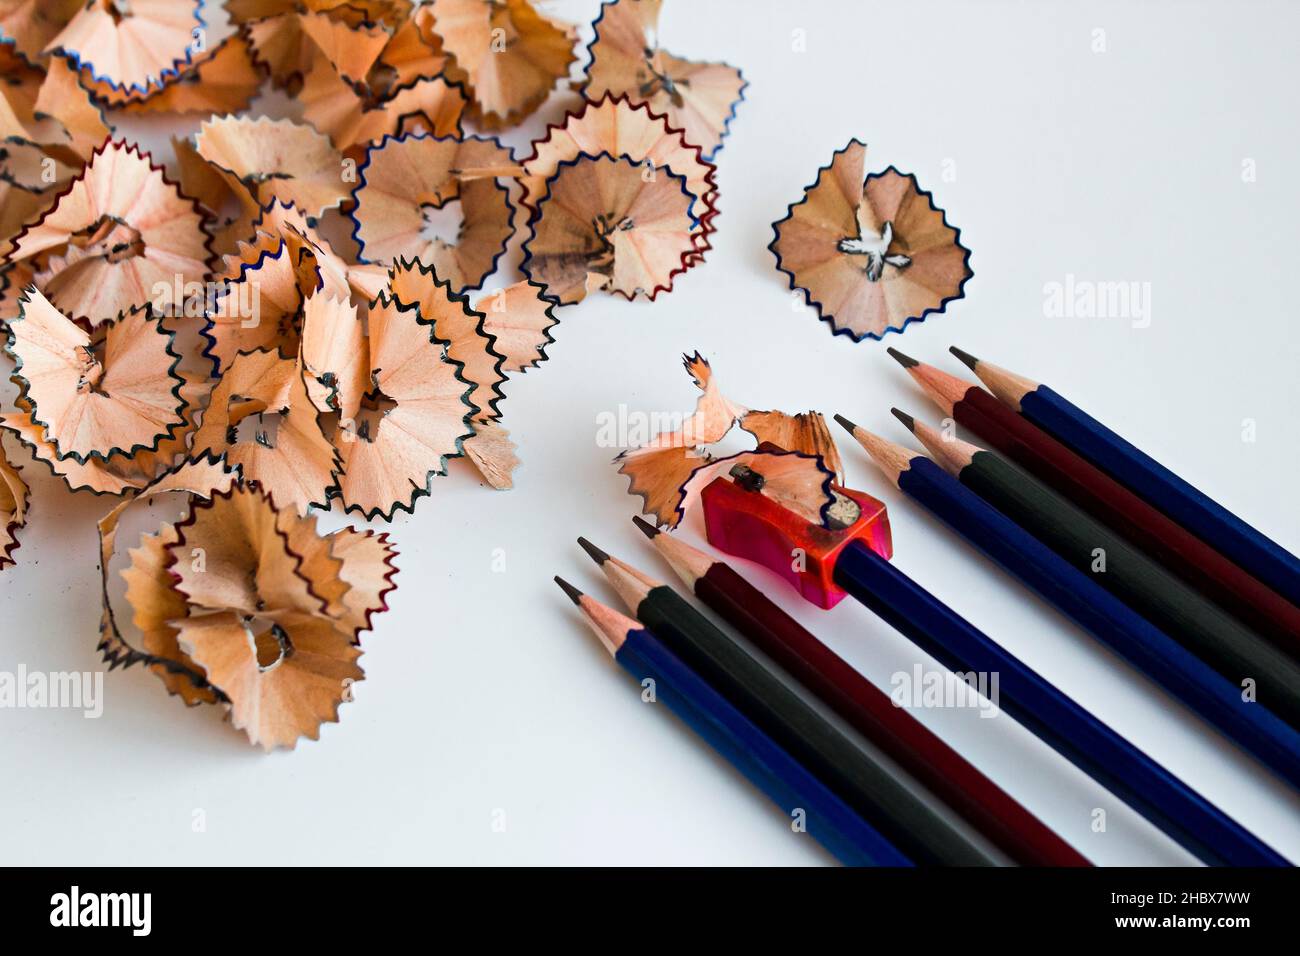 Toxic waste of lead pencils should be careful with kids and pets.Conceptual image of education. Stock Photo